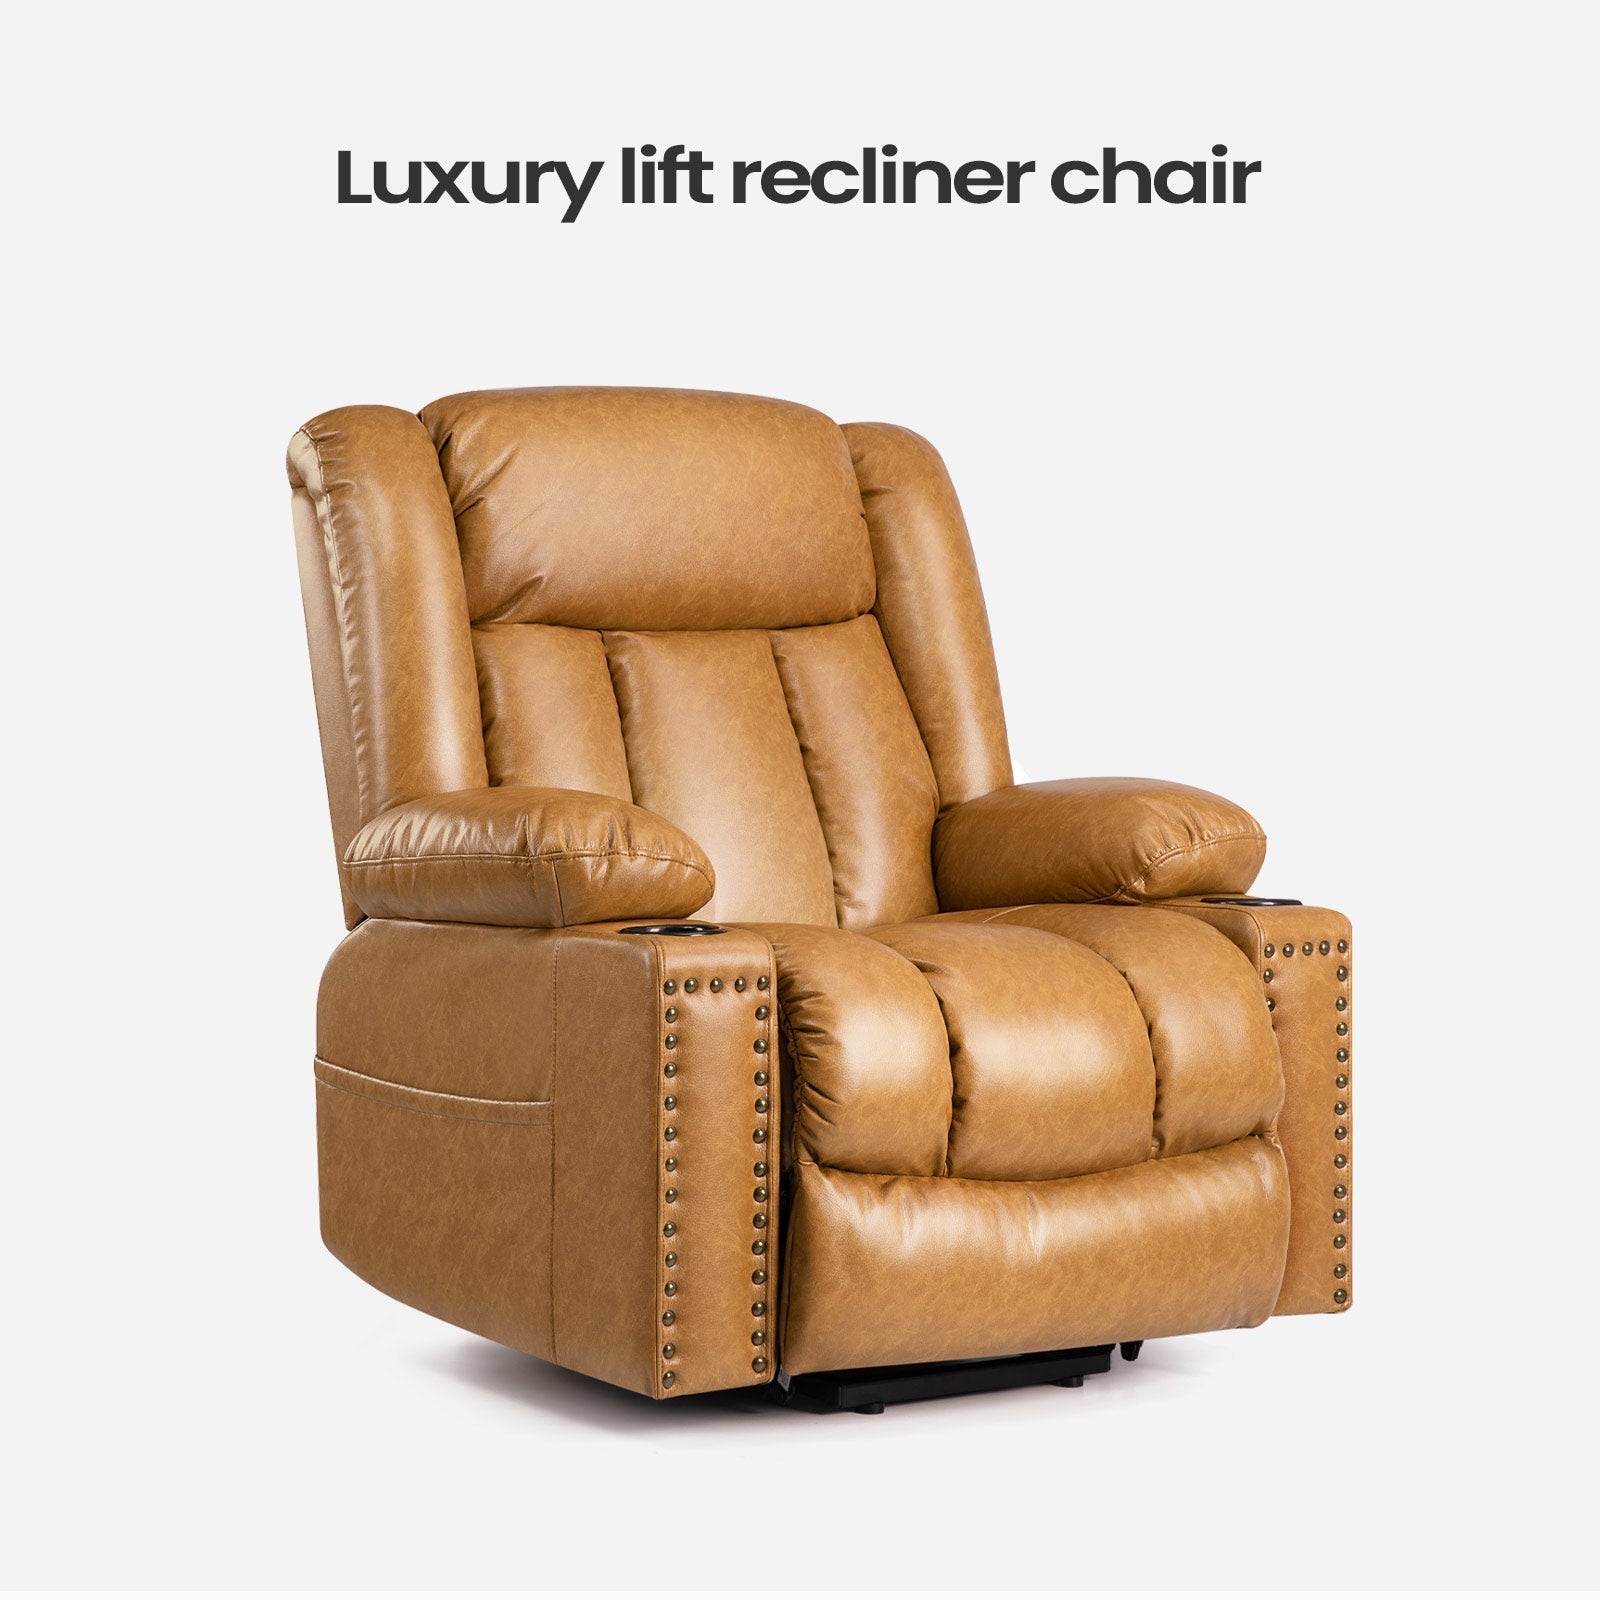 stand up recliners for the elderly